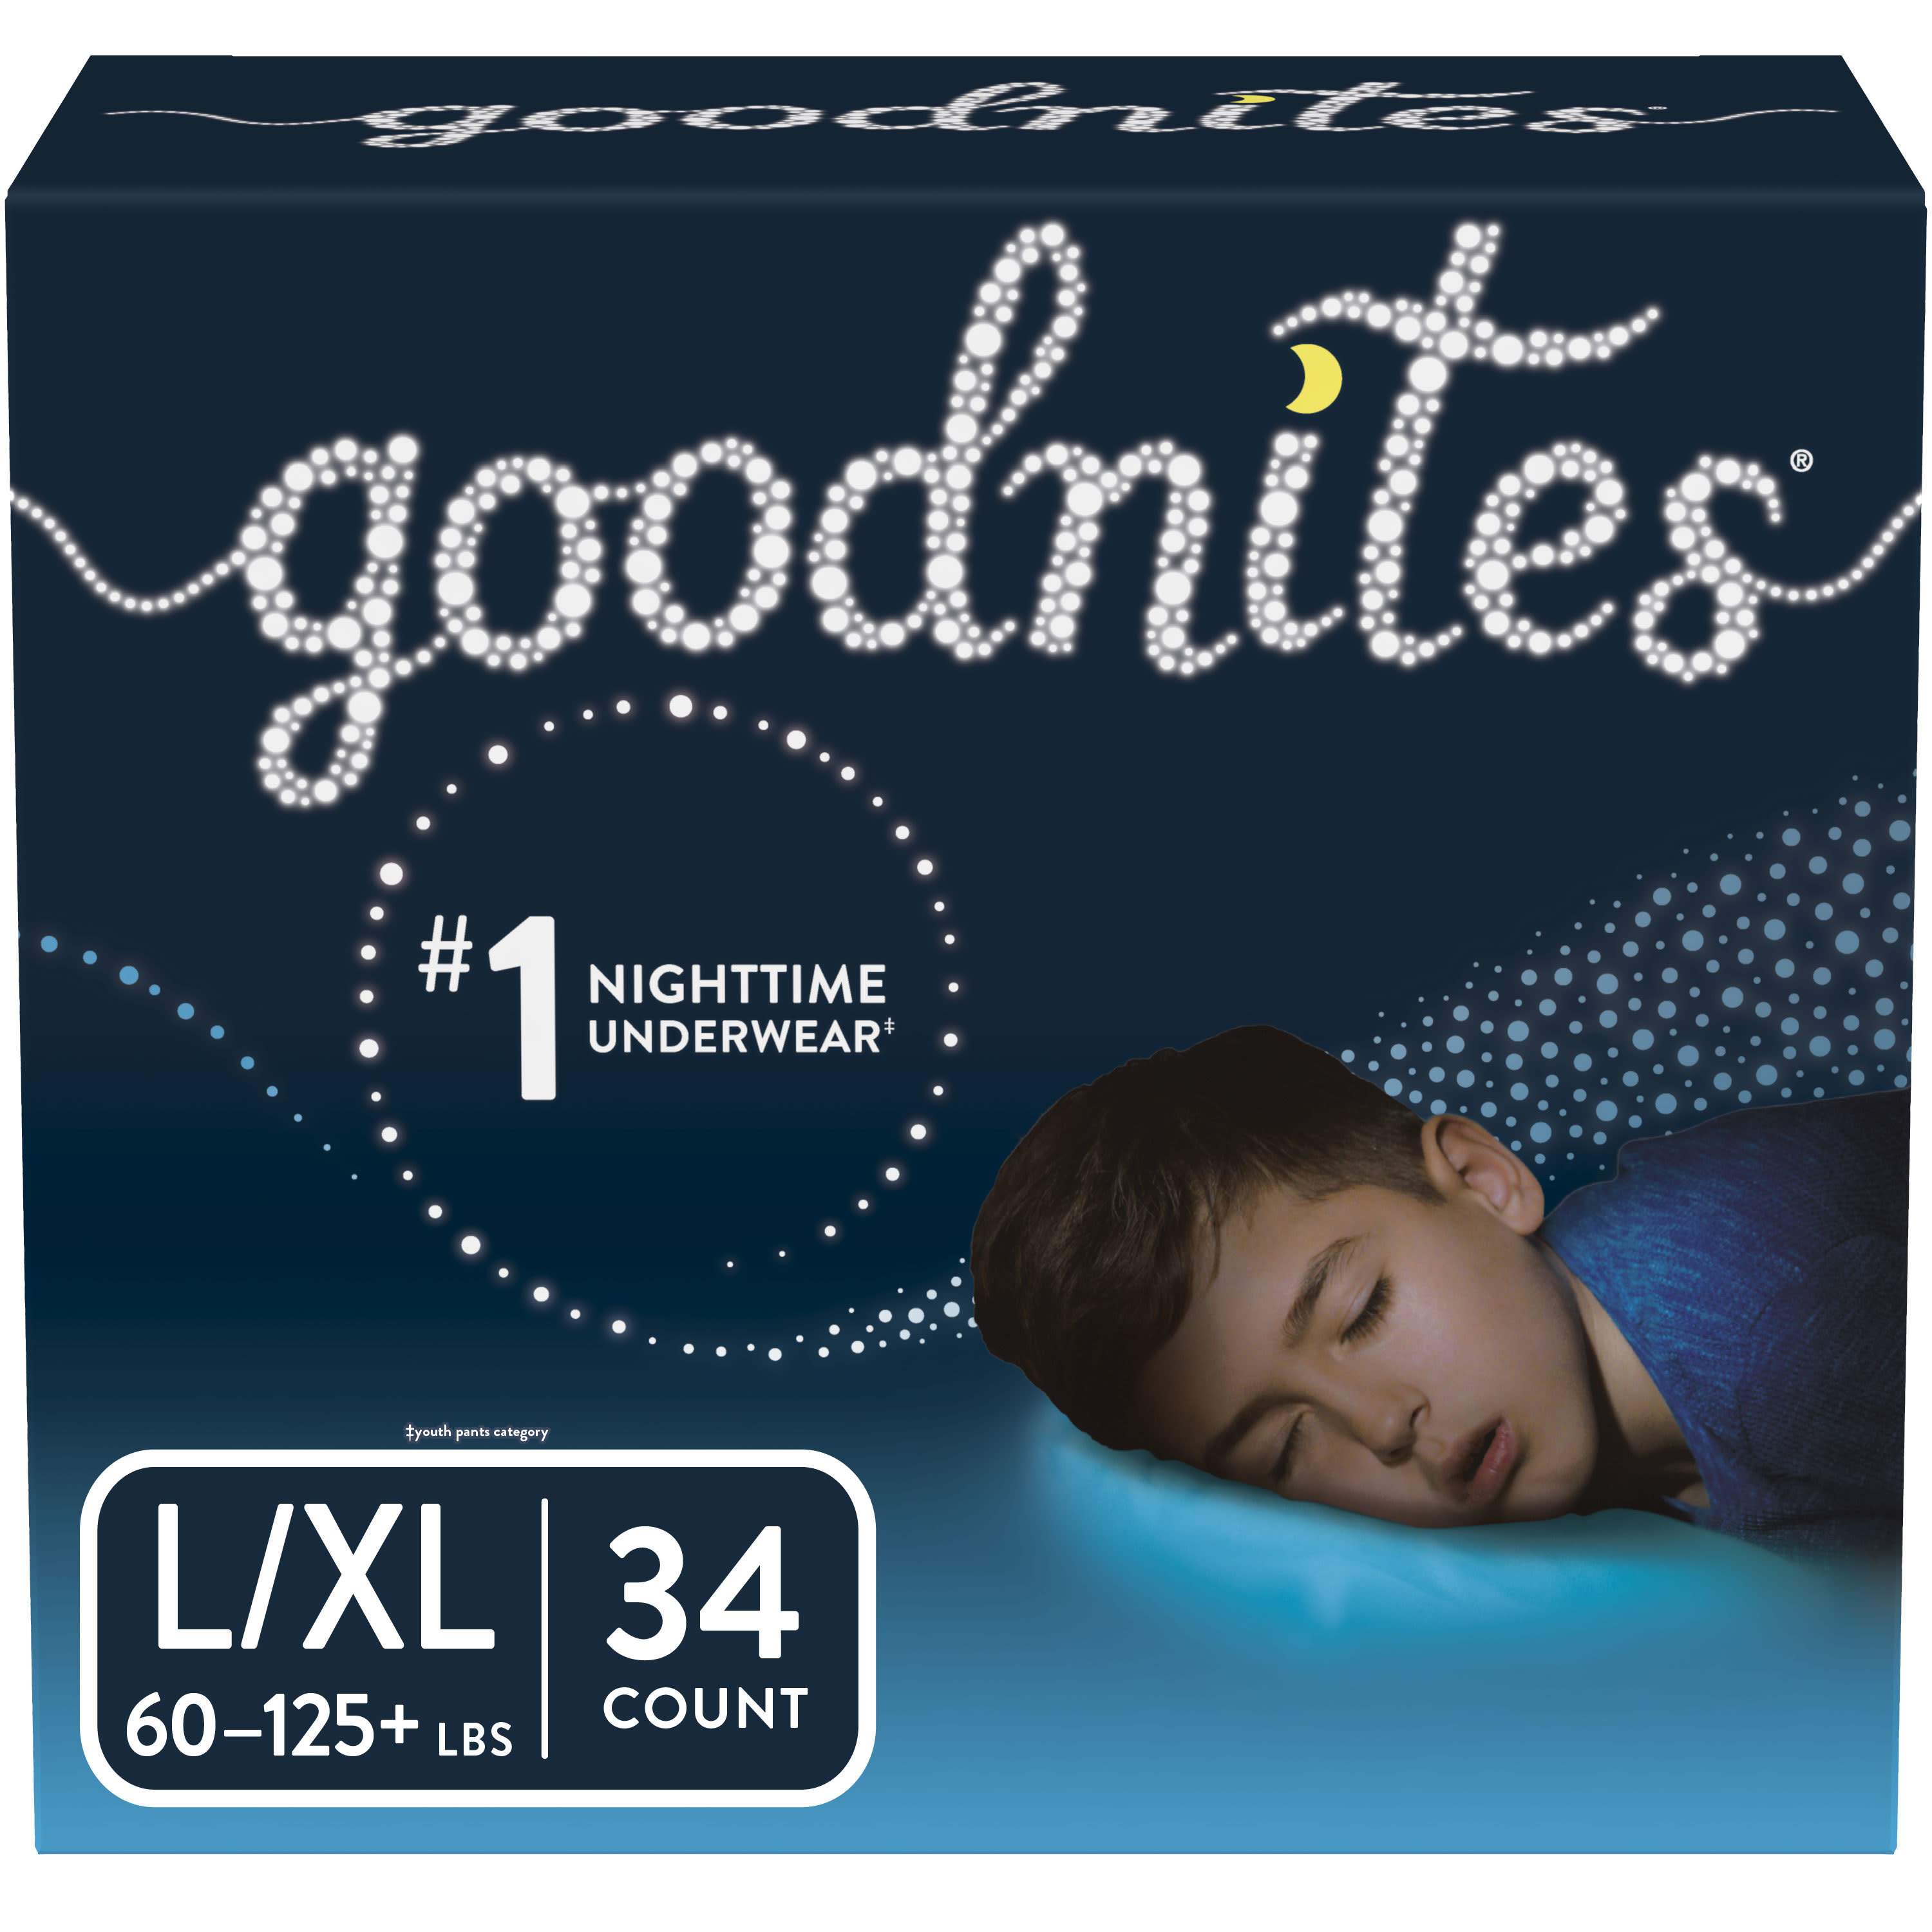 GoodNites Male Training Underwear, L/XL, 34 Count - image 1 of 11